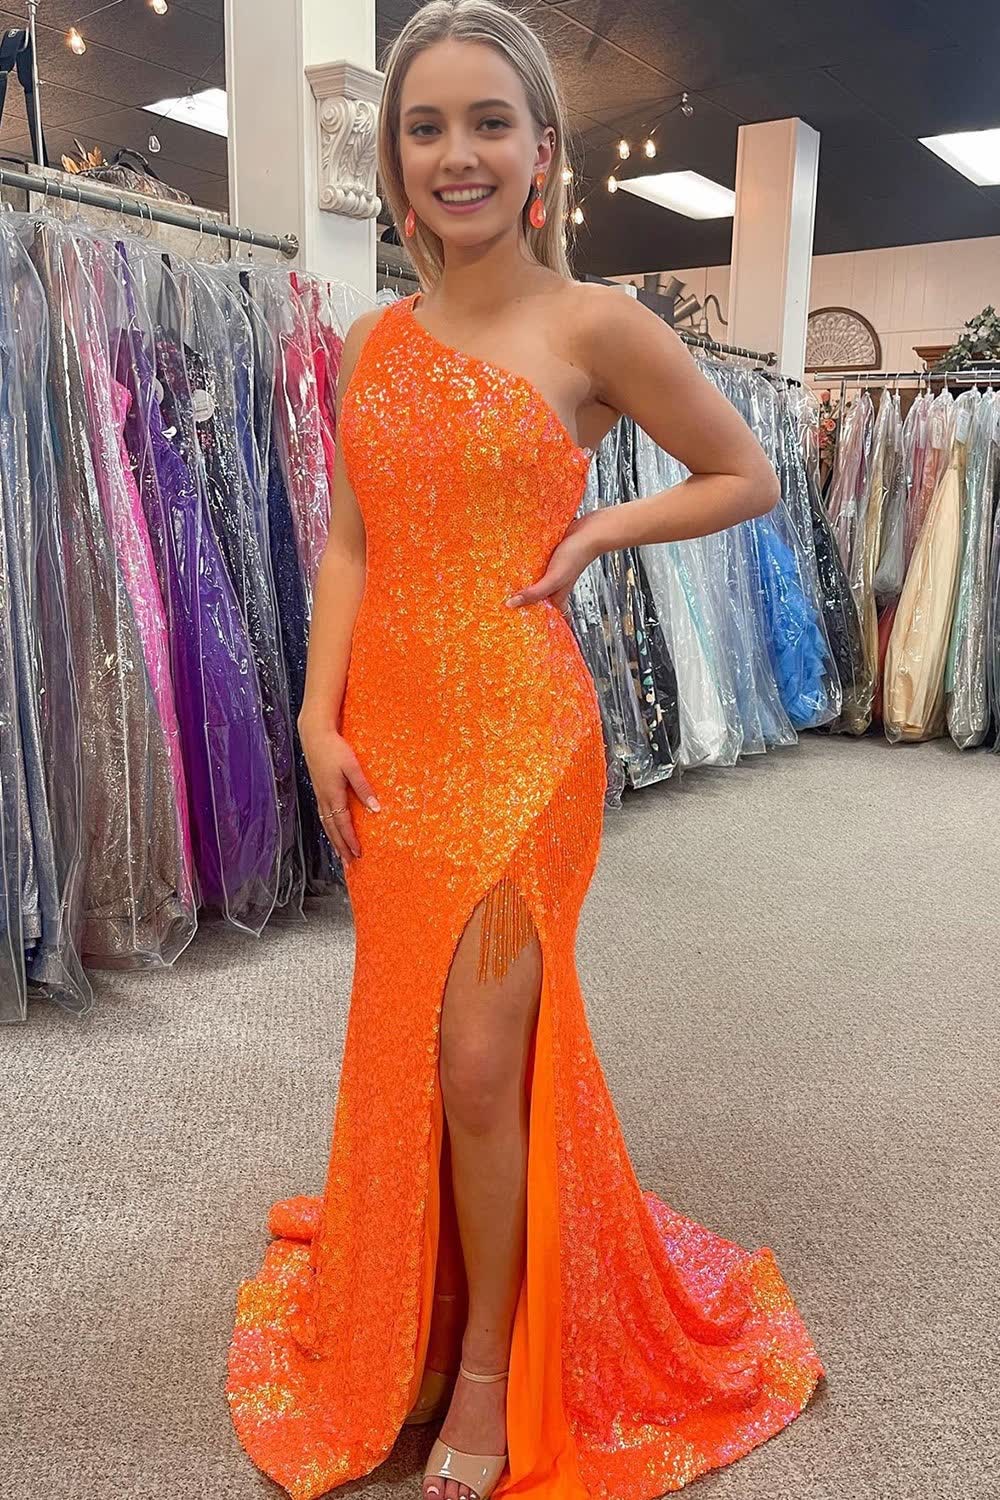 Sparkly Orange Sequins One Shoulder Mermaid Long Corset Prom Dress with Fringes outfit, Sparkly Orange Sequins One Shoulder Mermaid Long Prom Dress with Fringes